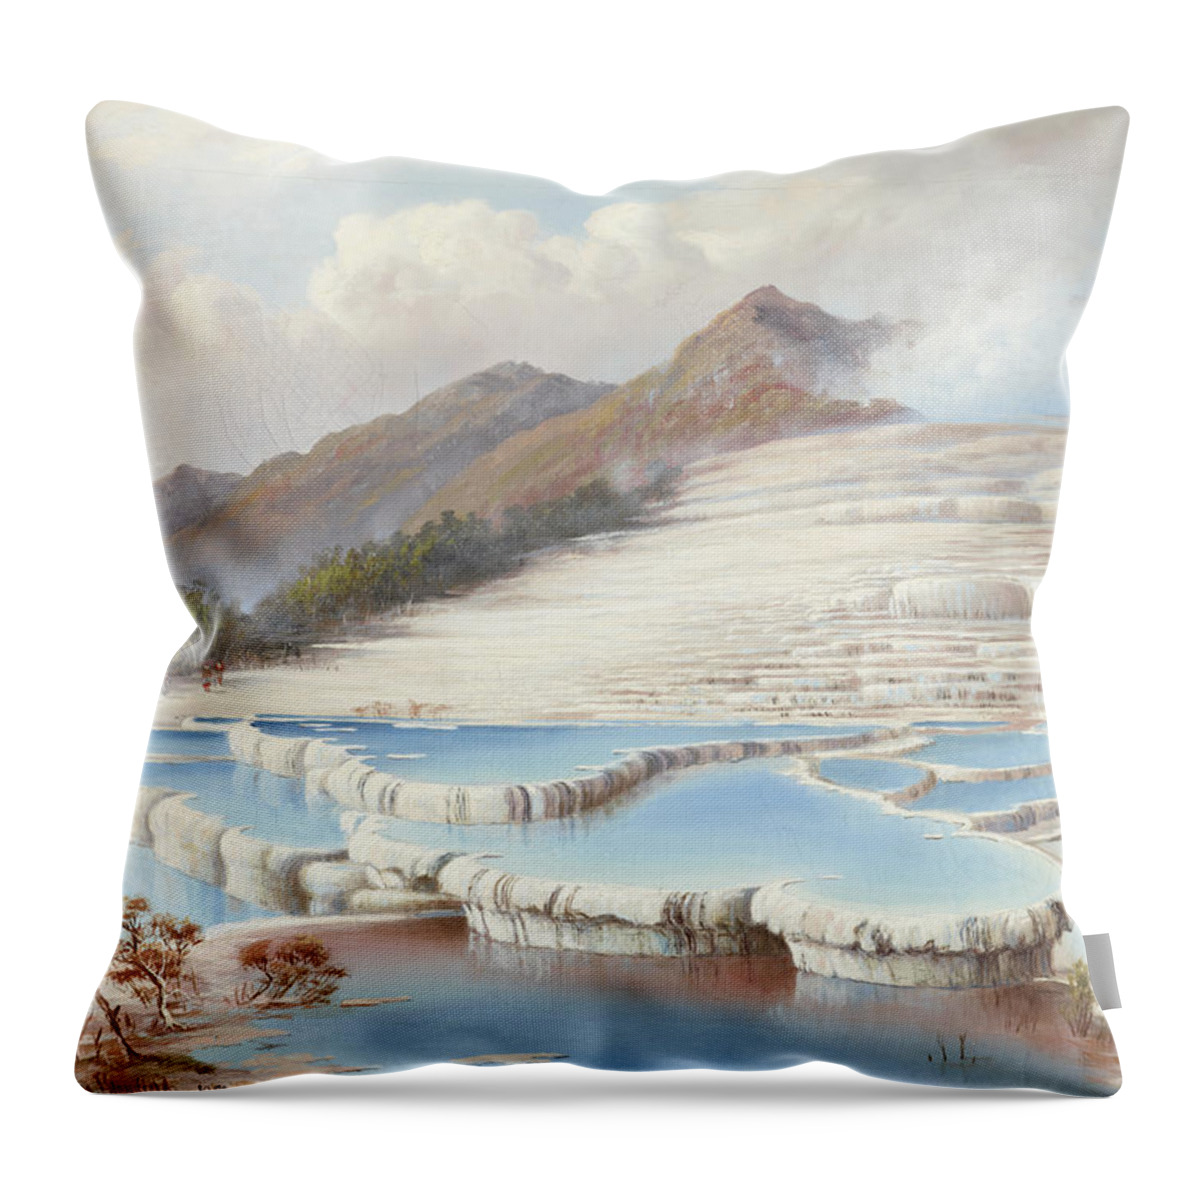 White Terraces Throw Pillow featuring the painting White Terraces by Celestial Images